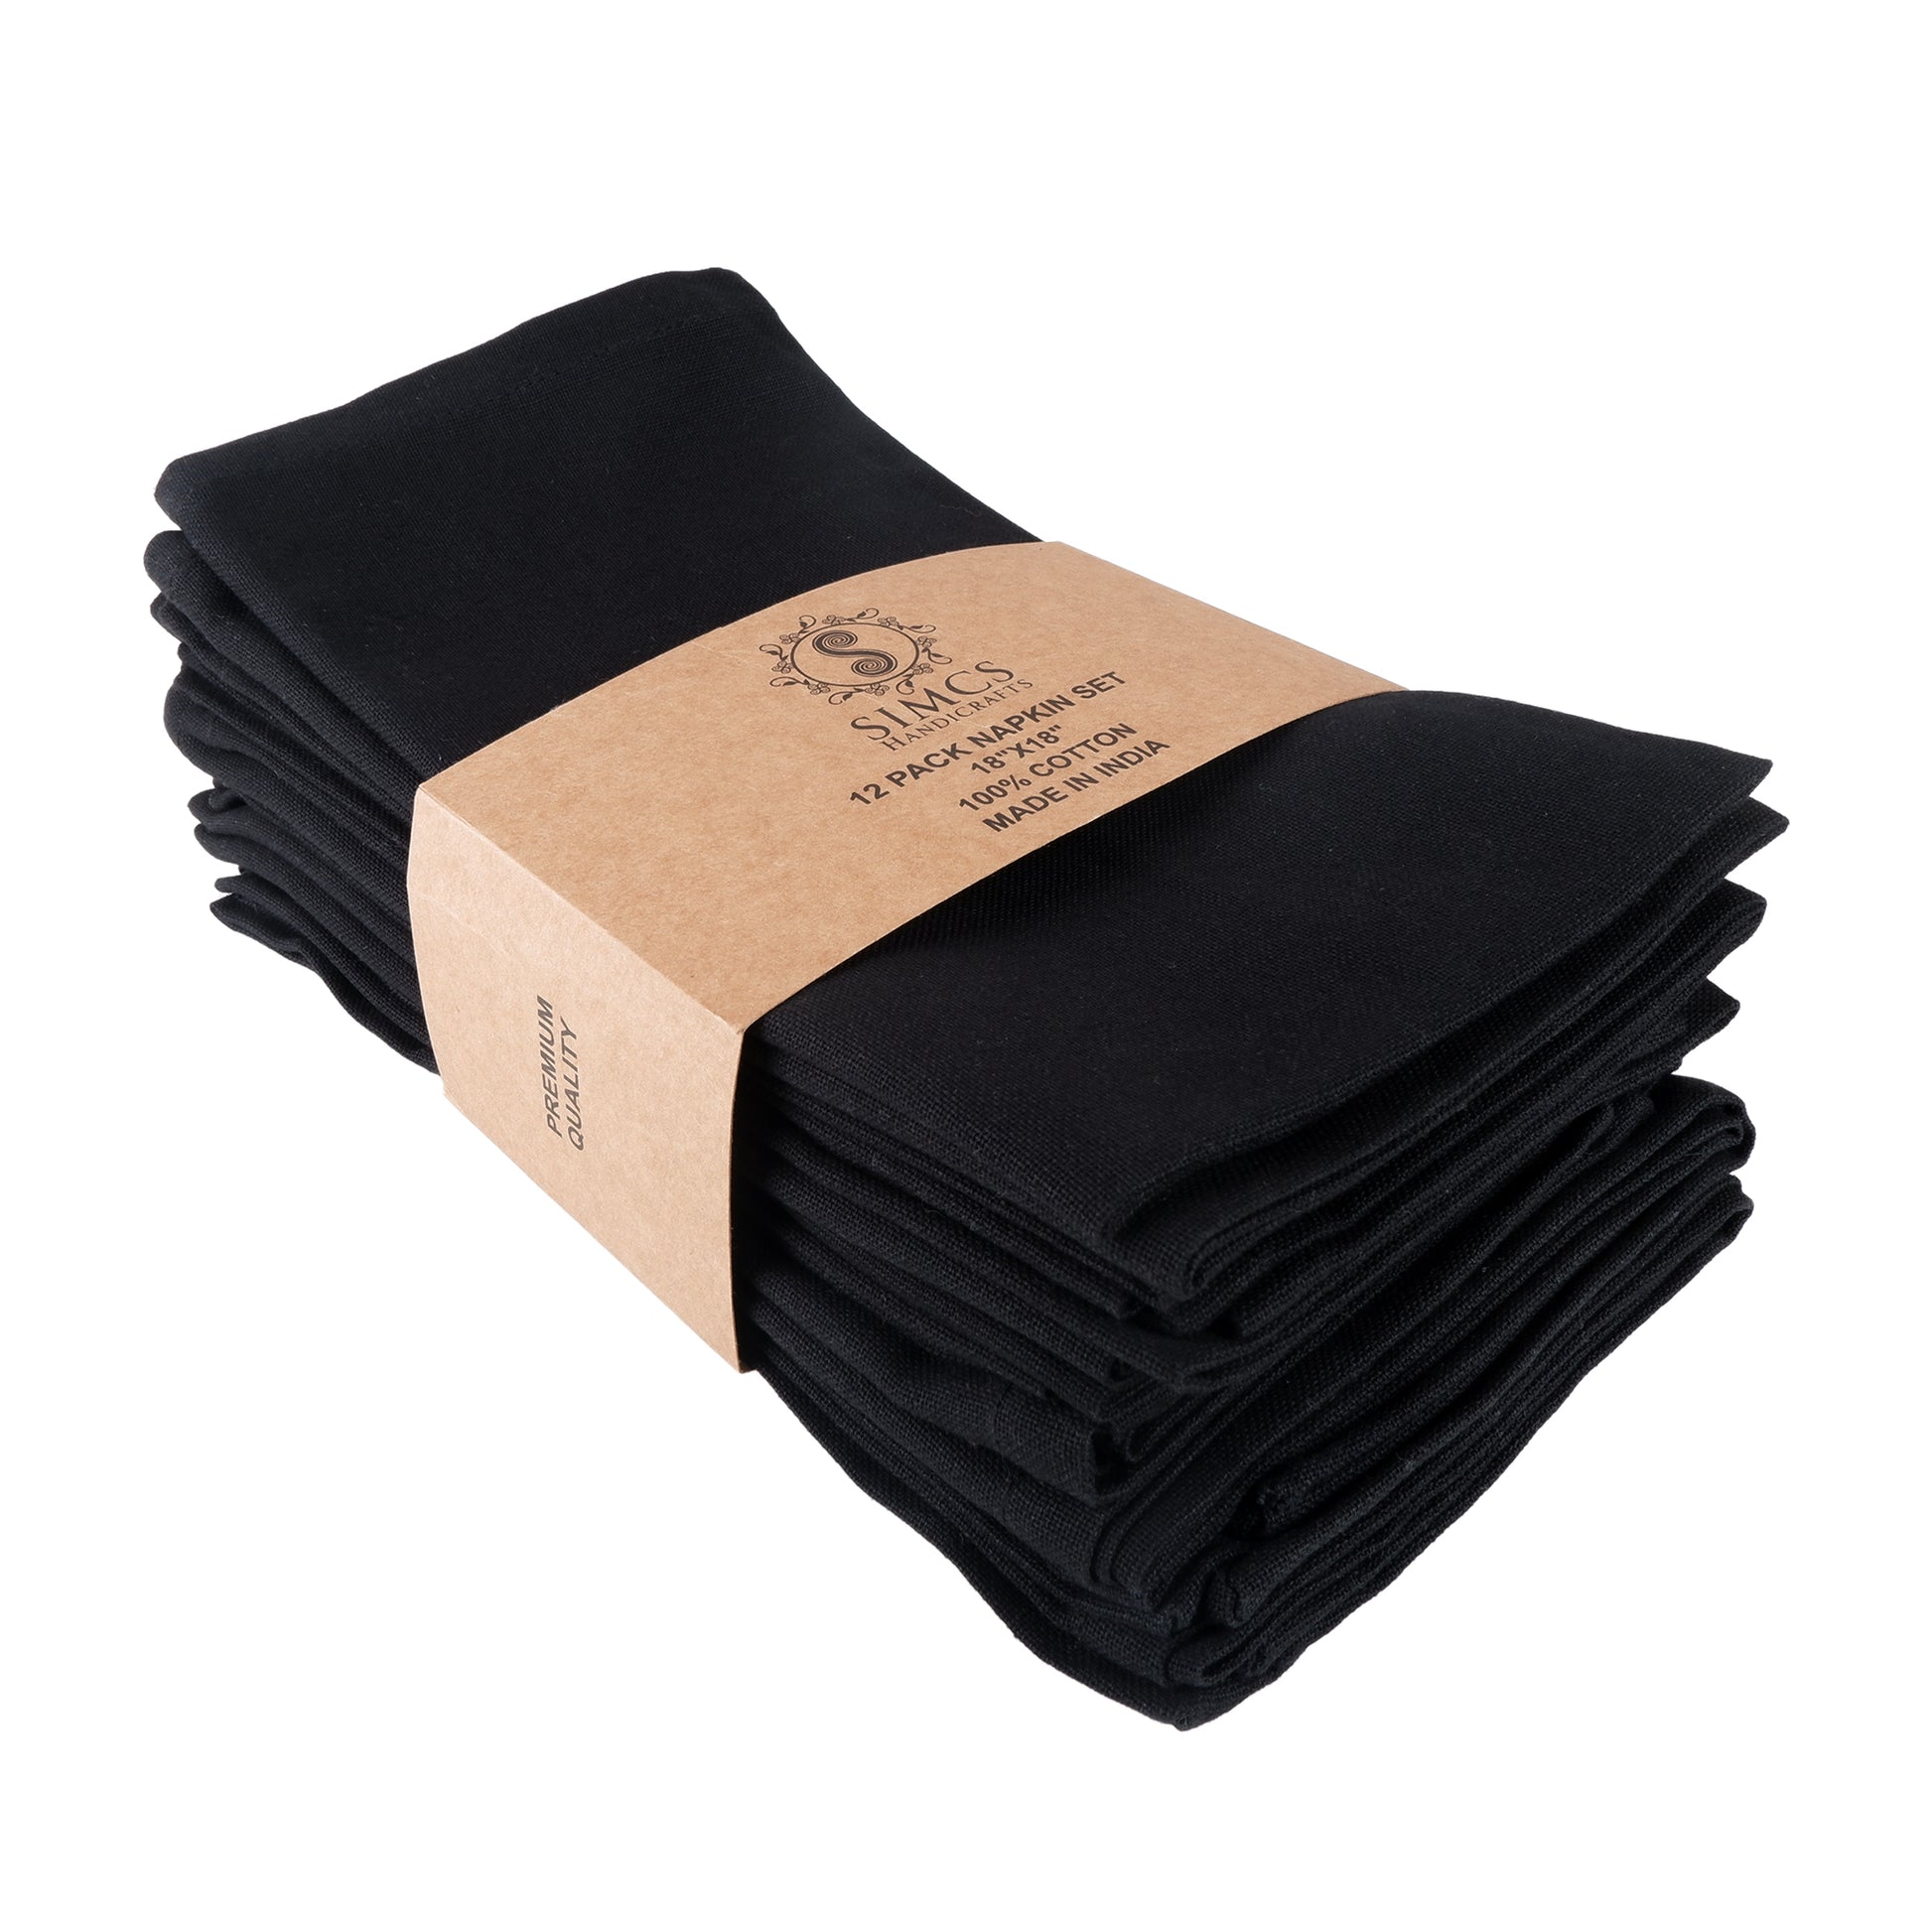 Hausattire Cloth Napkins Set of 12 (18x18 inches) Black - Cotton Reusable Dinner Napkins - Durable and Perfect for Everyday Use